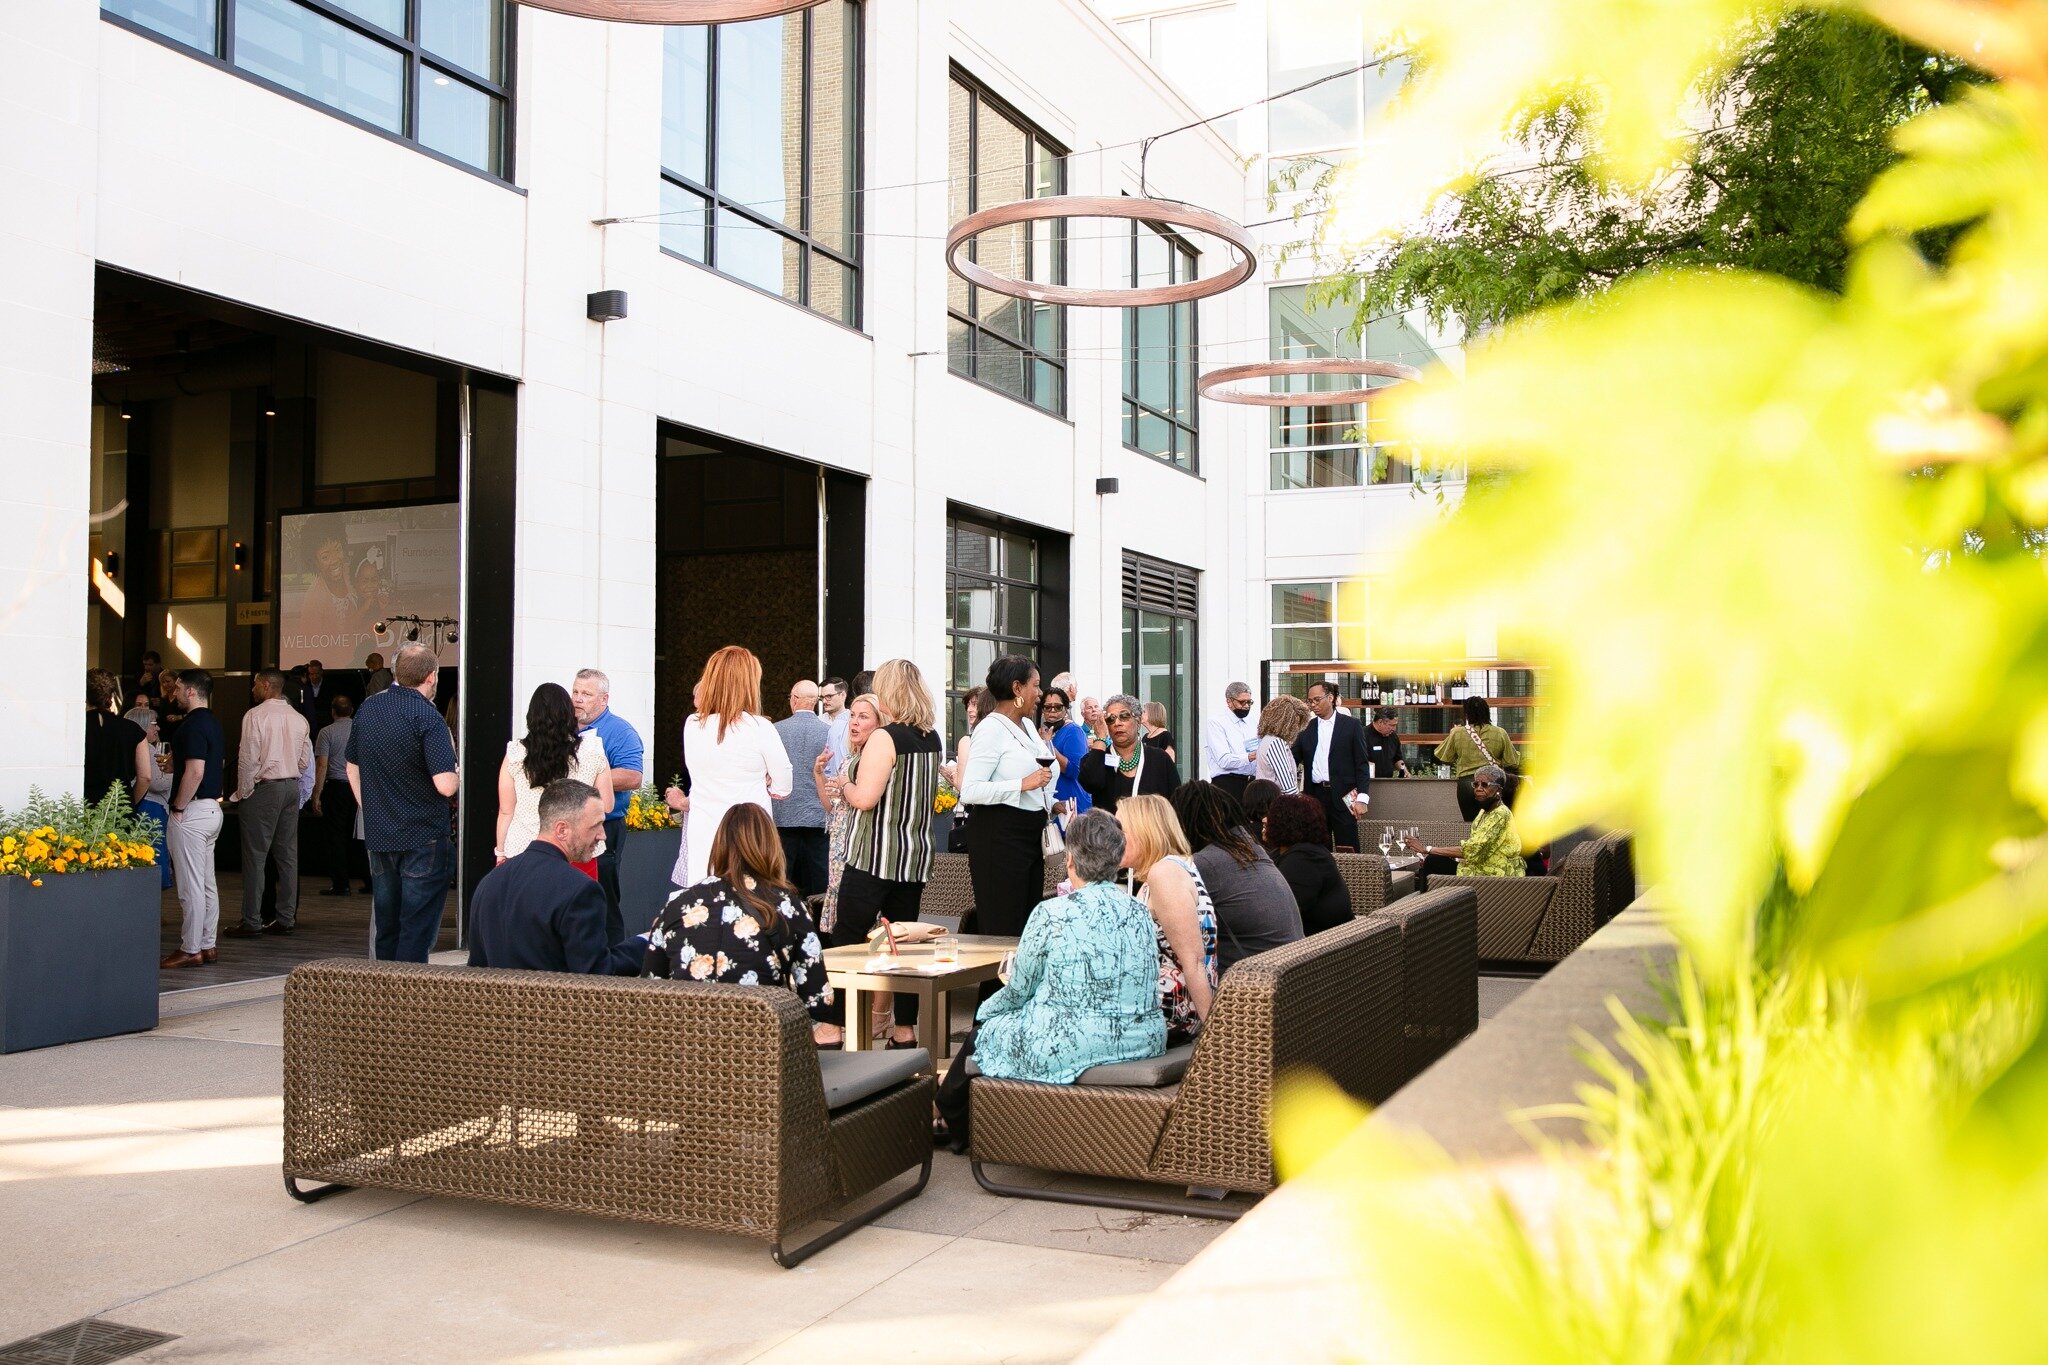 Patio season is just around the corner!

We're reminiscing about the Big Hearts Gala for @furniturebankcoh  Furniture Bank of Ohio, where guests could wander between the Social Hall and Patio through open garage doors as they enjoyed their evening. 
